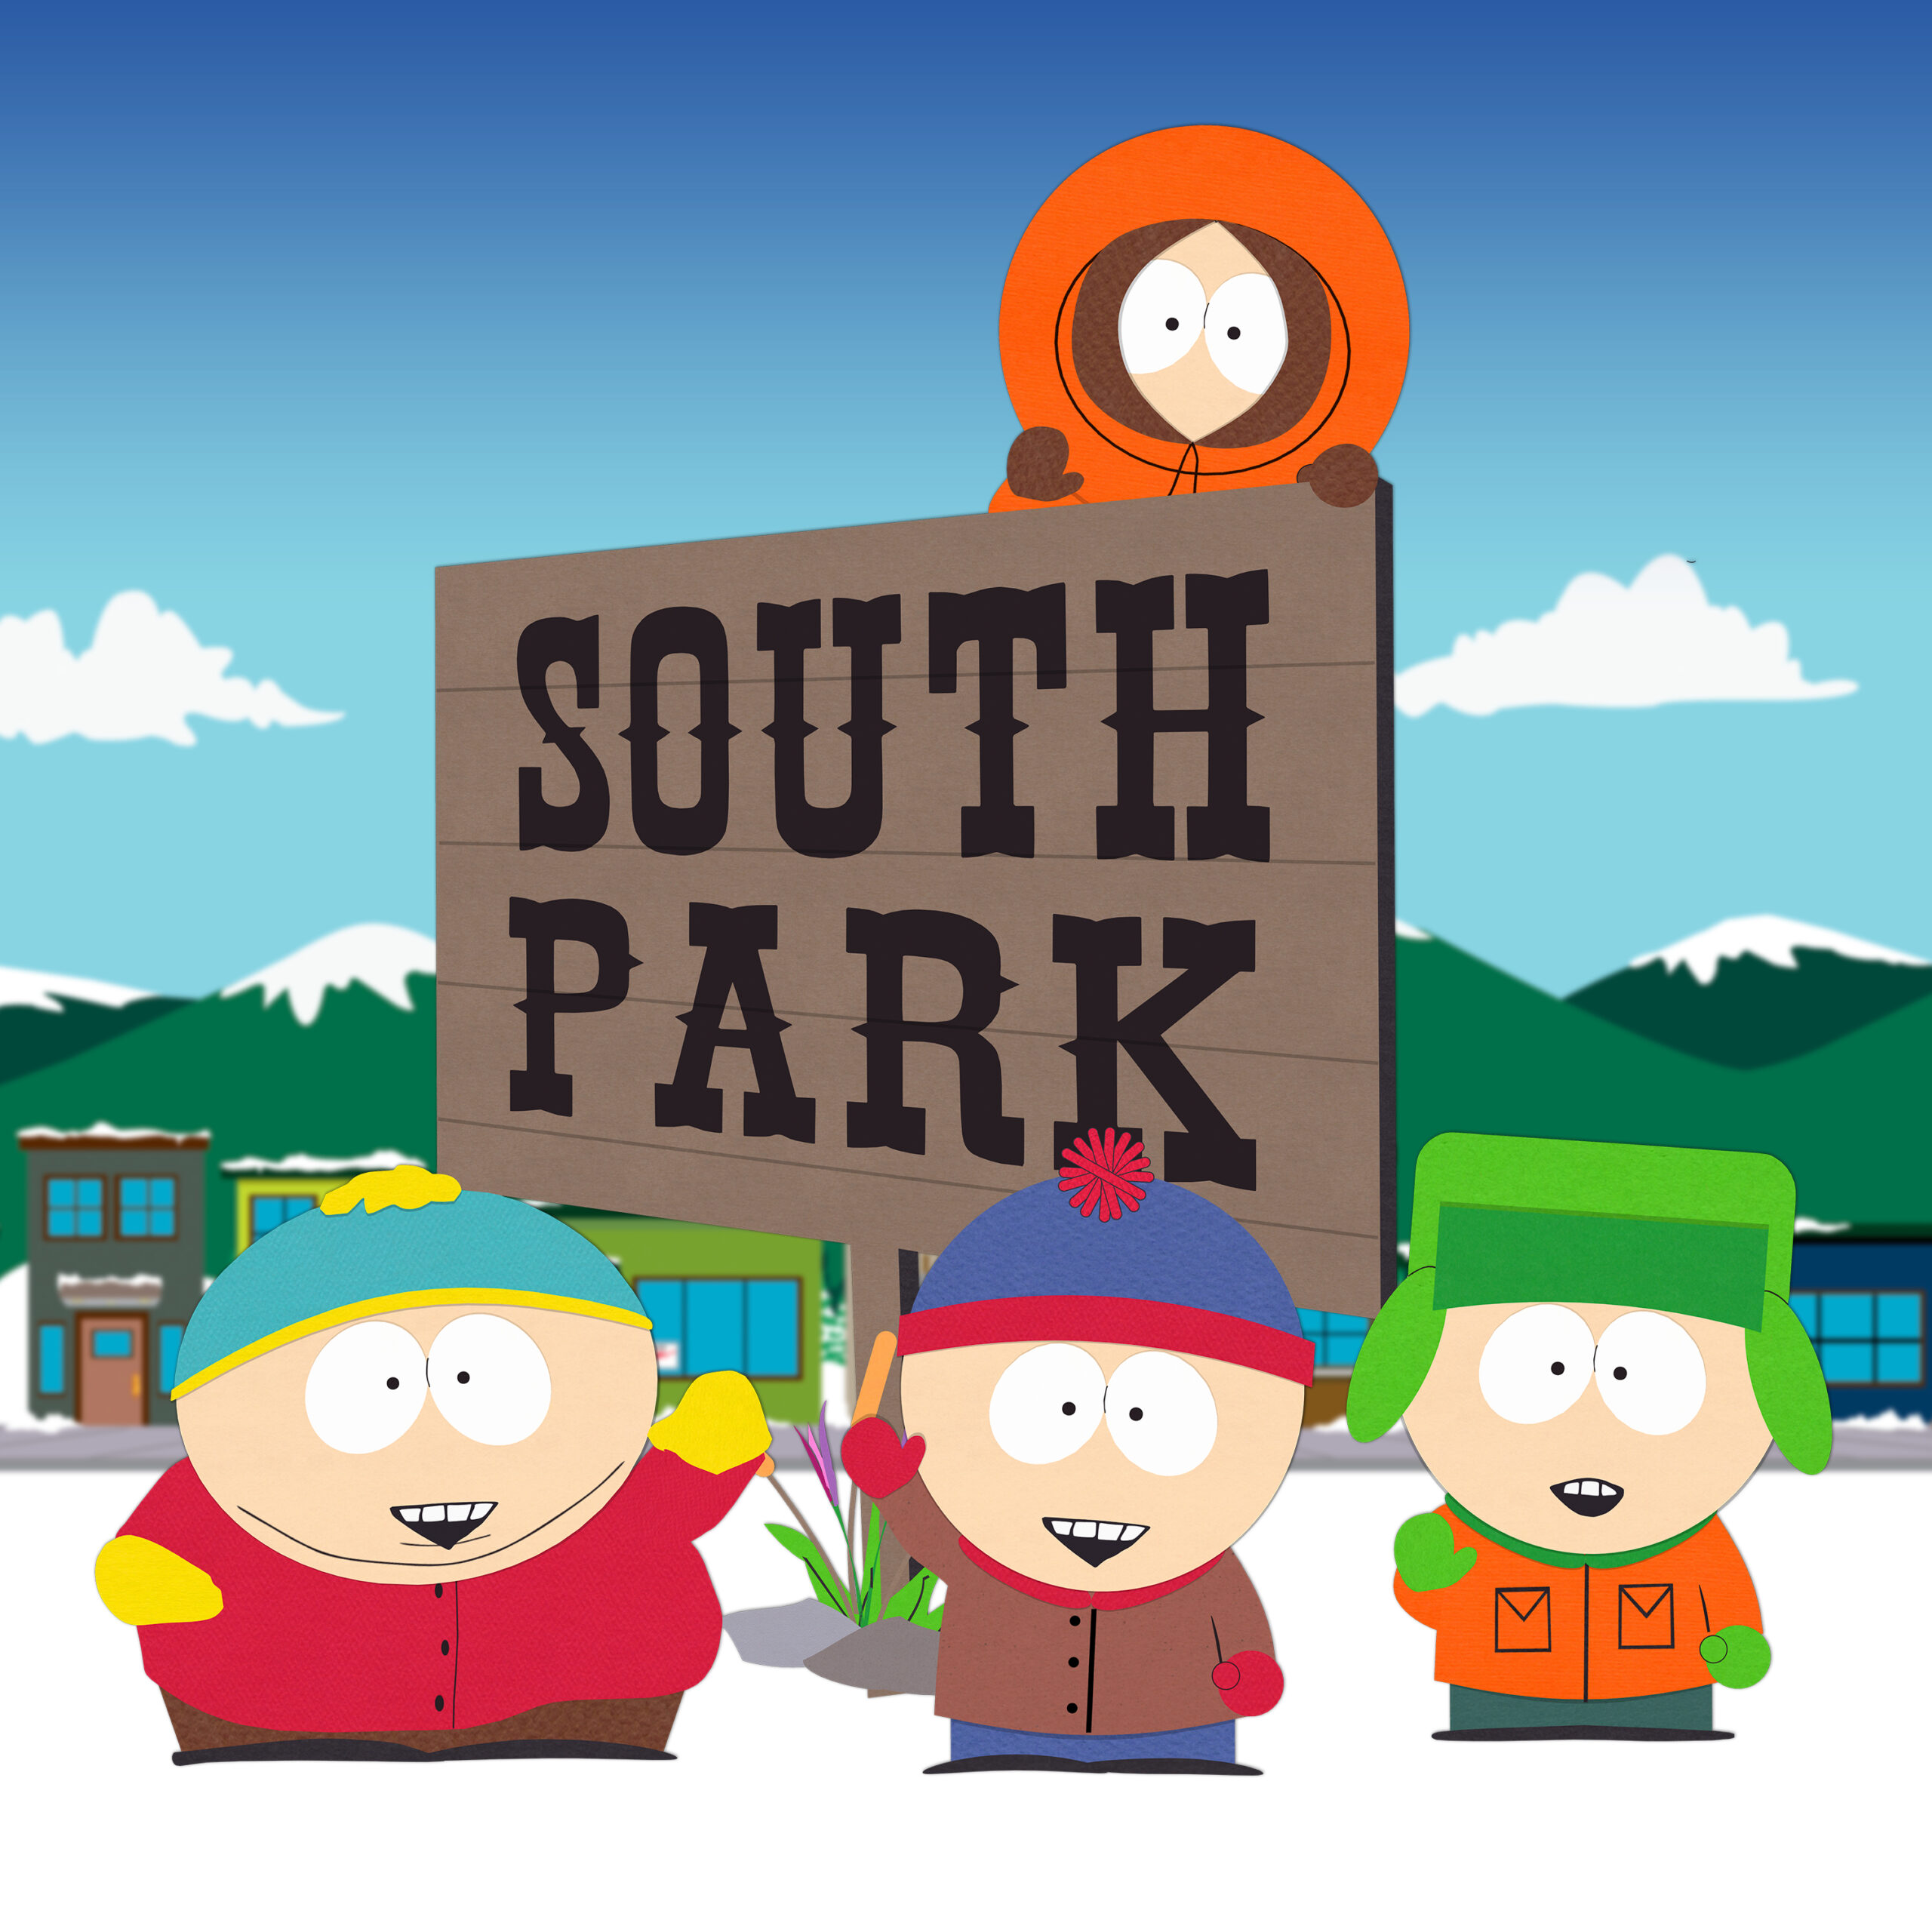 A promotional photo for Comedy Central series South Park